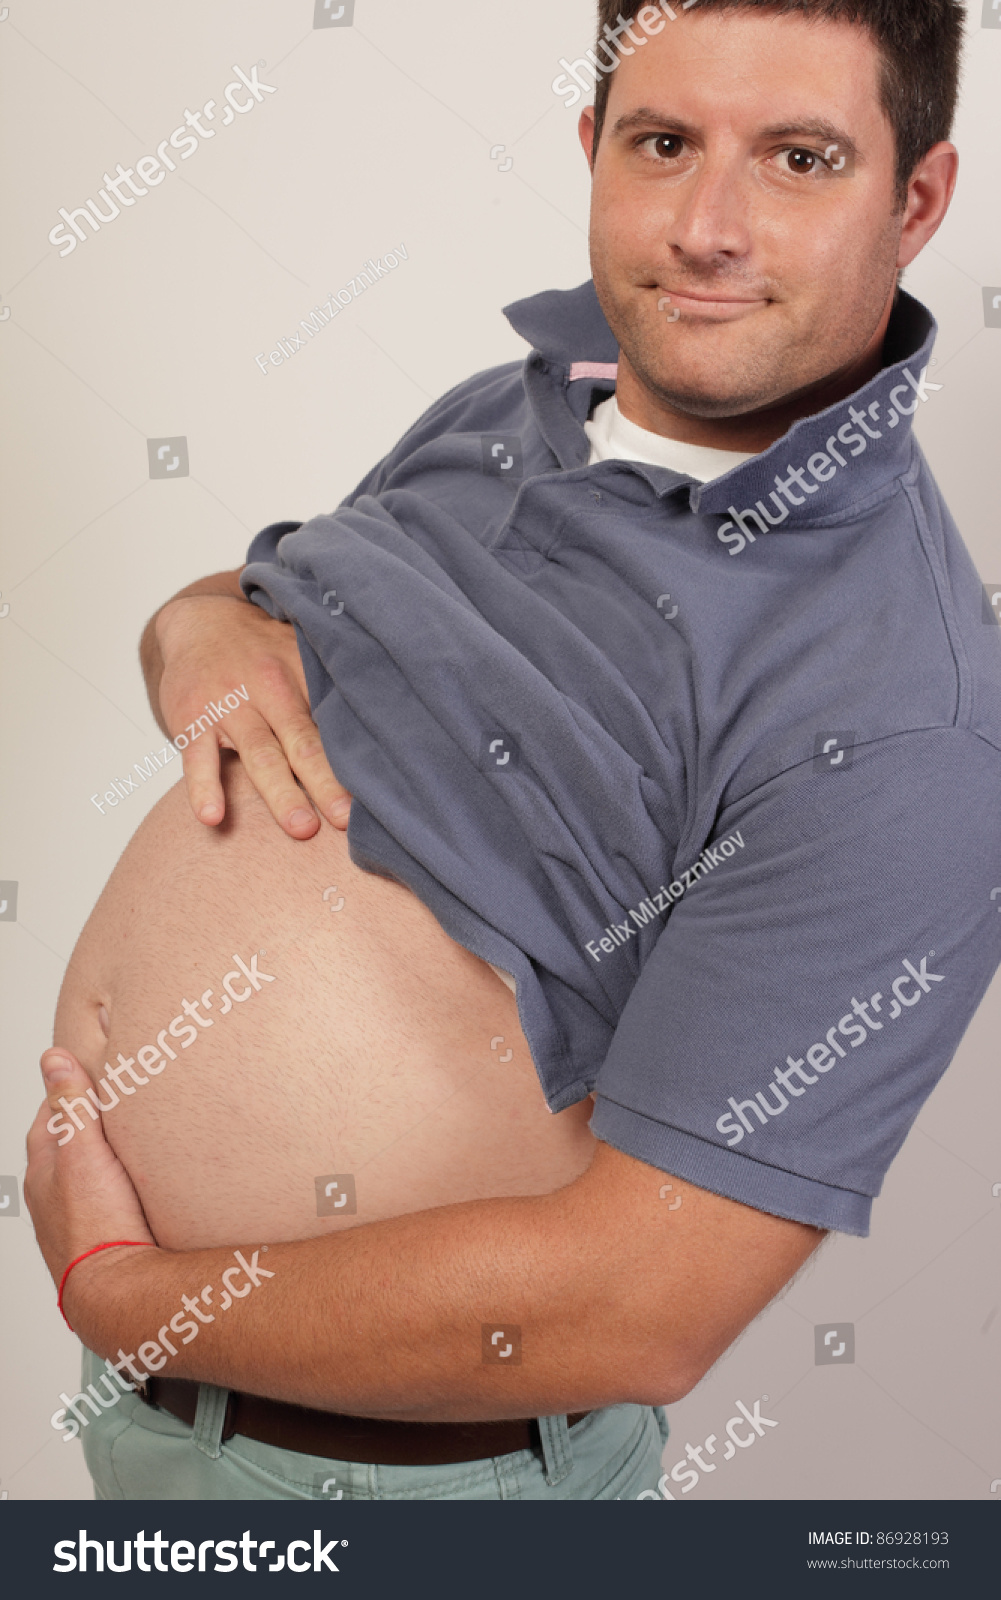 Pictures Of The Pregnant Man 51